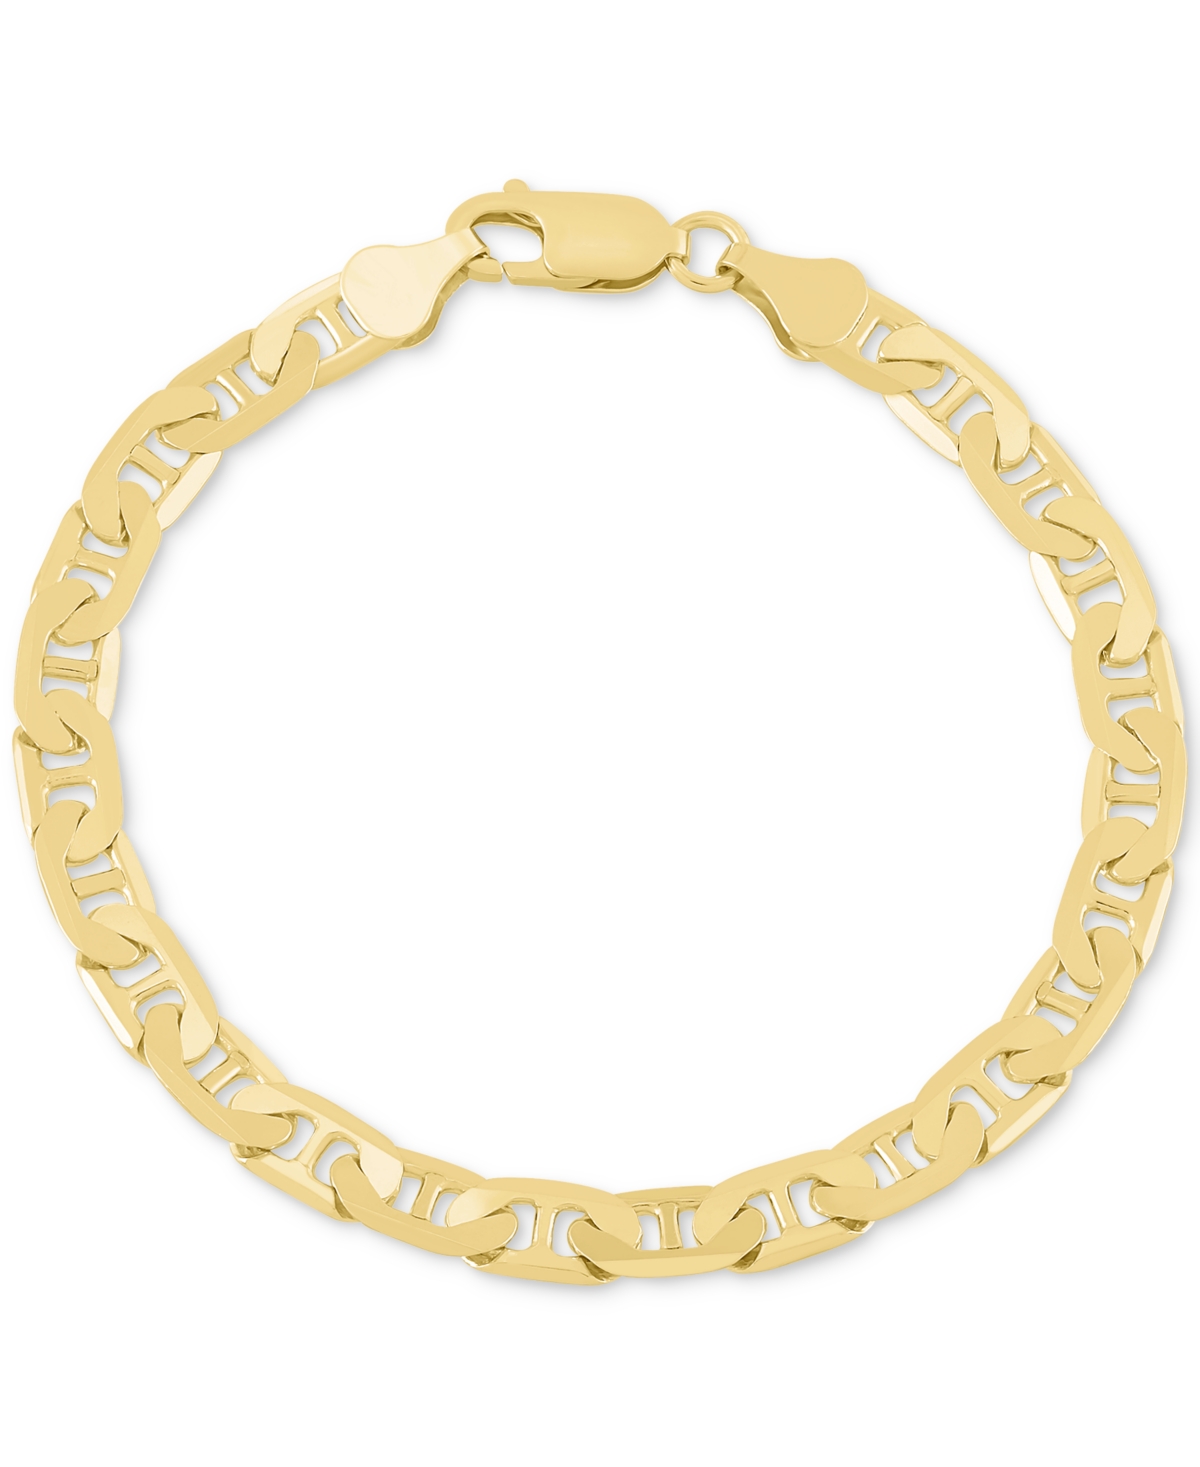 Italian Silver Men's  Polished Mariner Link Chain Bracelet In Gold Over Silver